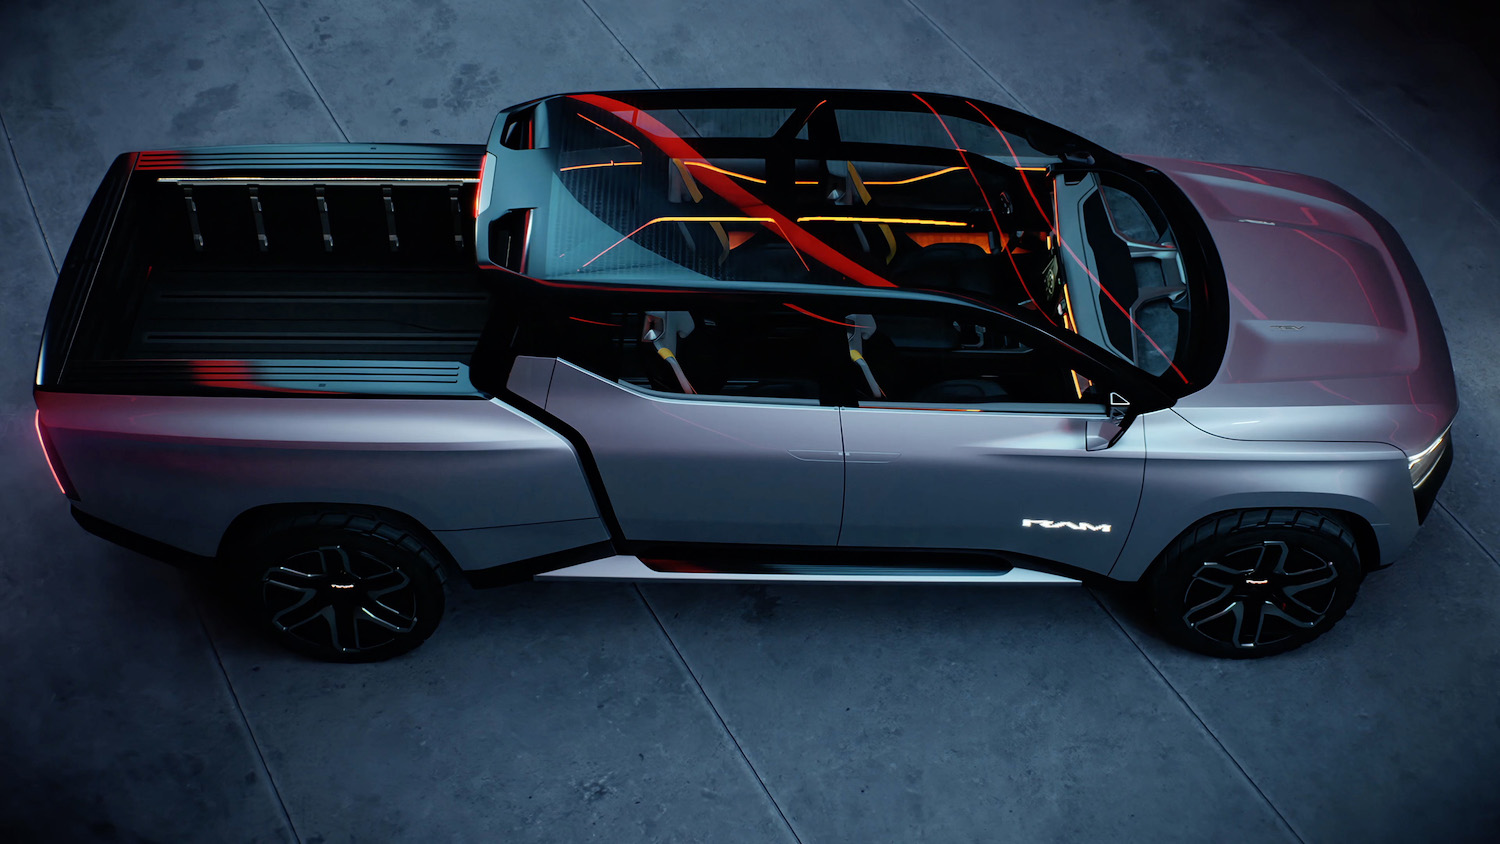 Birds-eye view of the Ram 1500 Revolution electric pickup concept with its glass roof and full-size truck bed.